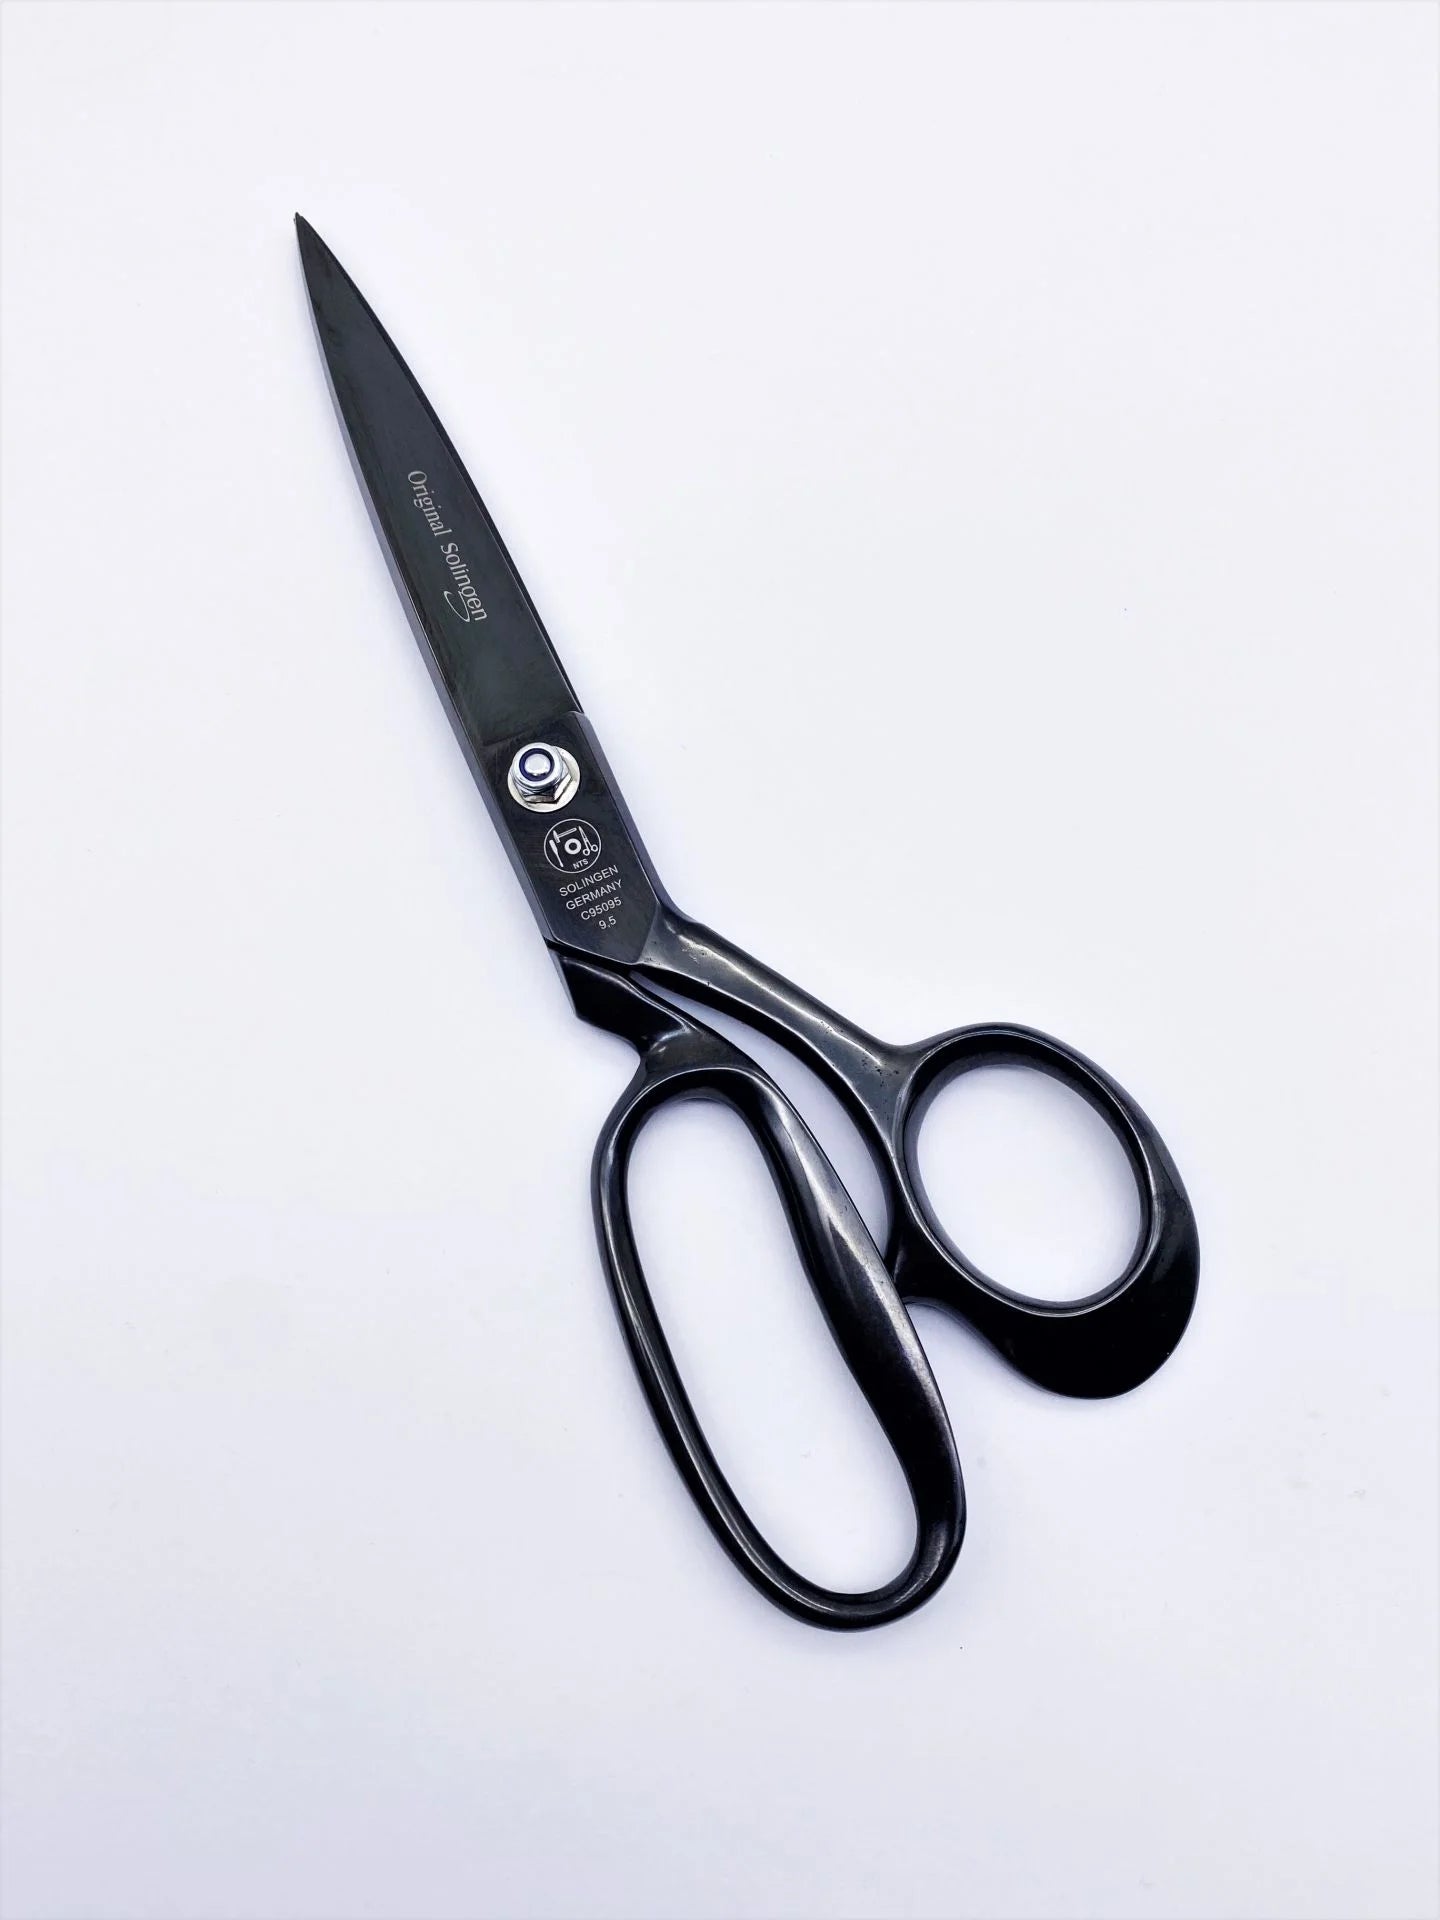 TAILOR SCISSORS TEXTILE Shears Fabric Cutting Sewing Solingen Stainless  Steel $17.81 - PicClick